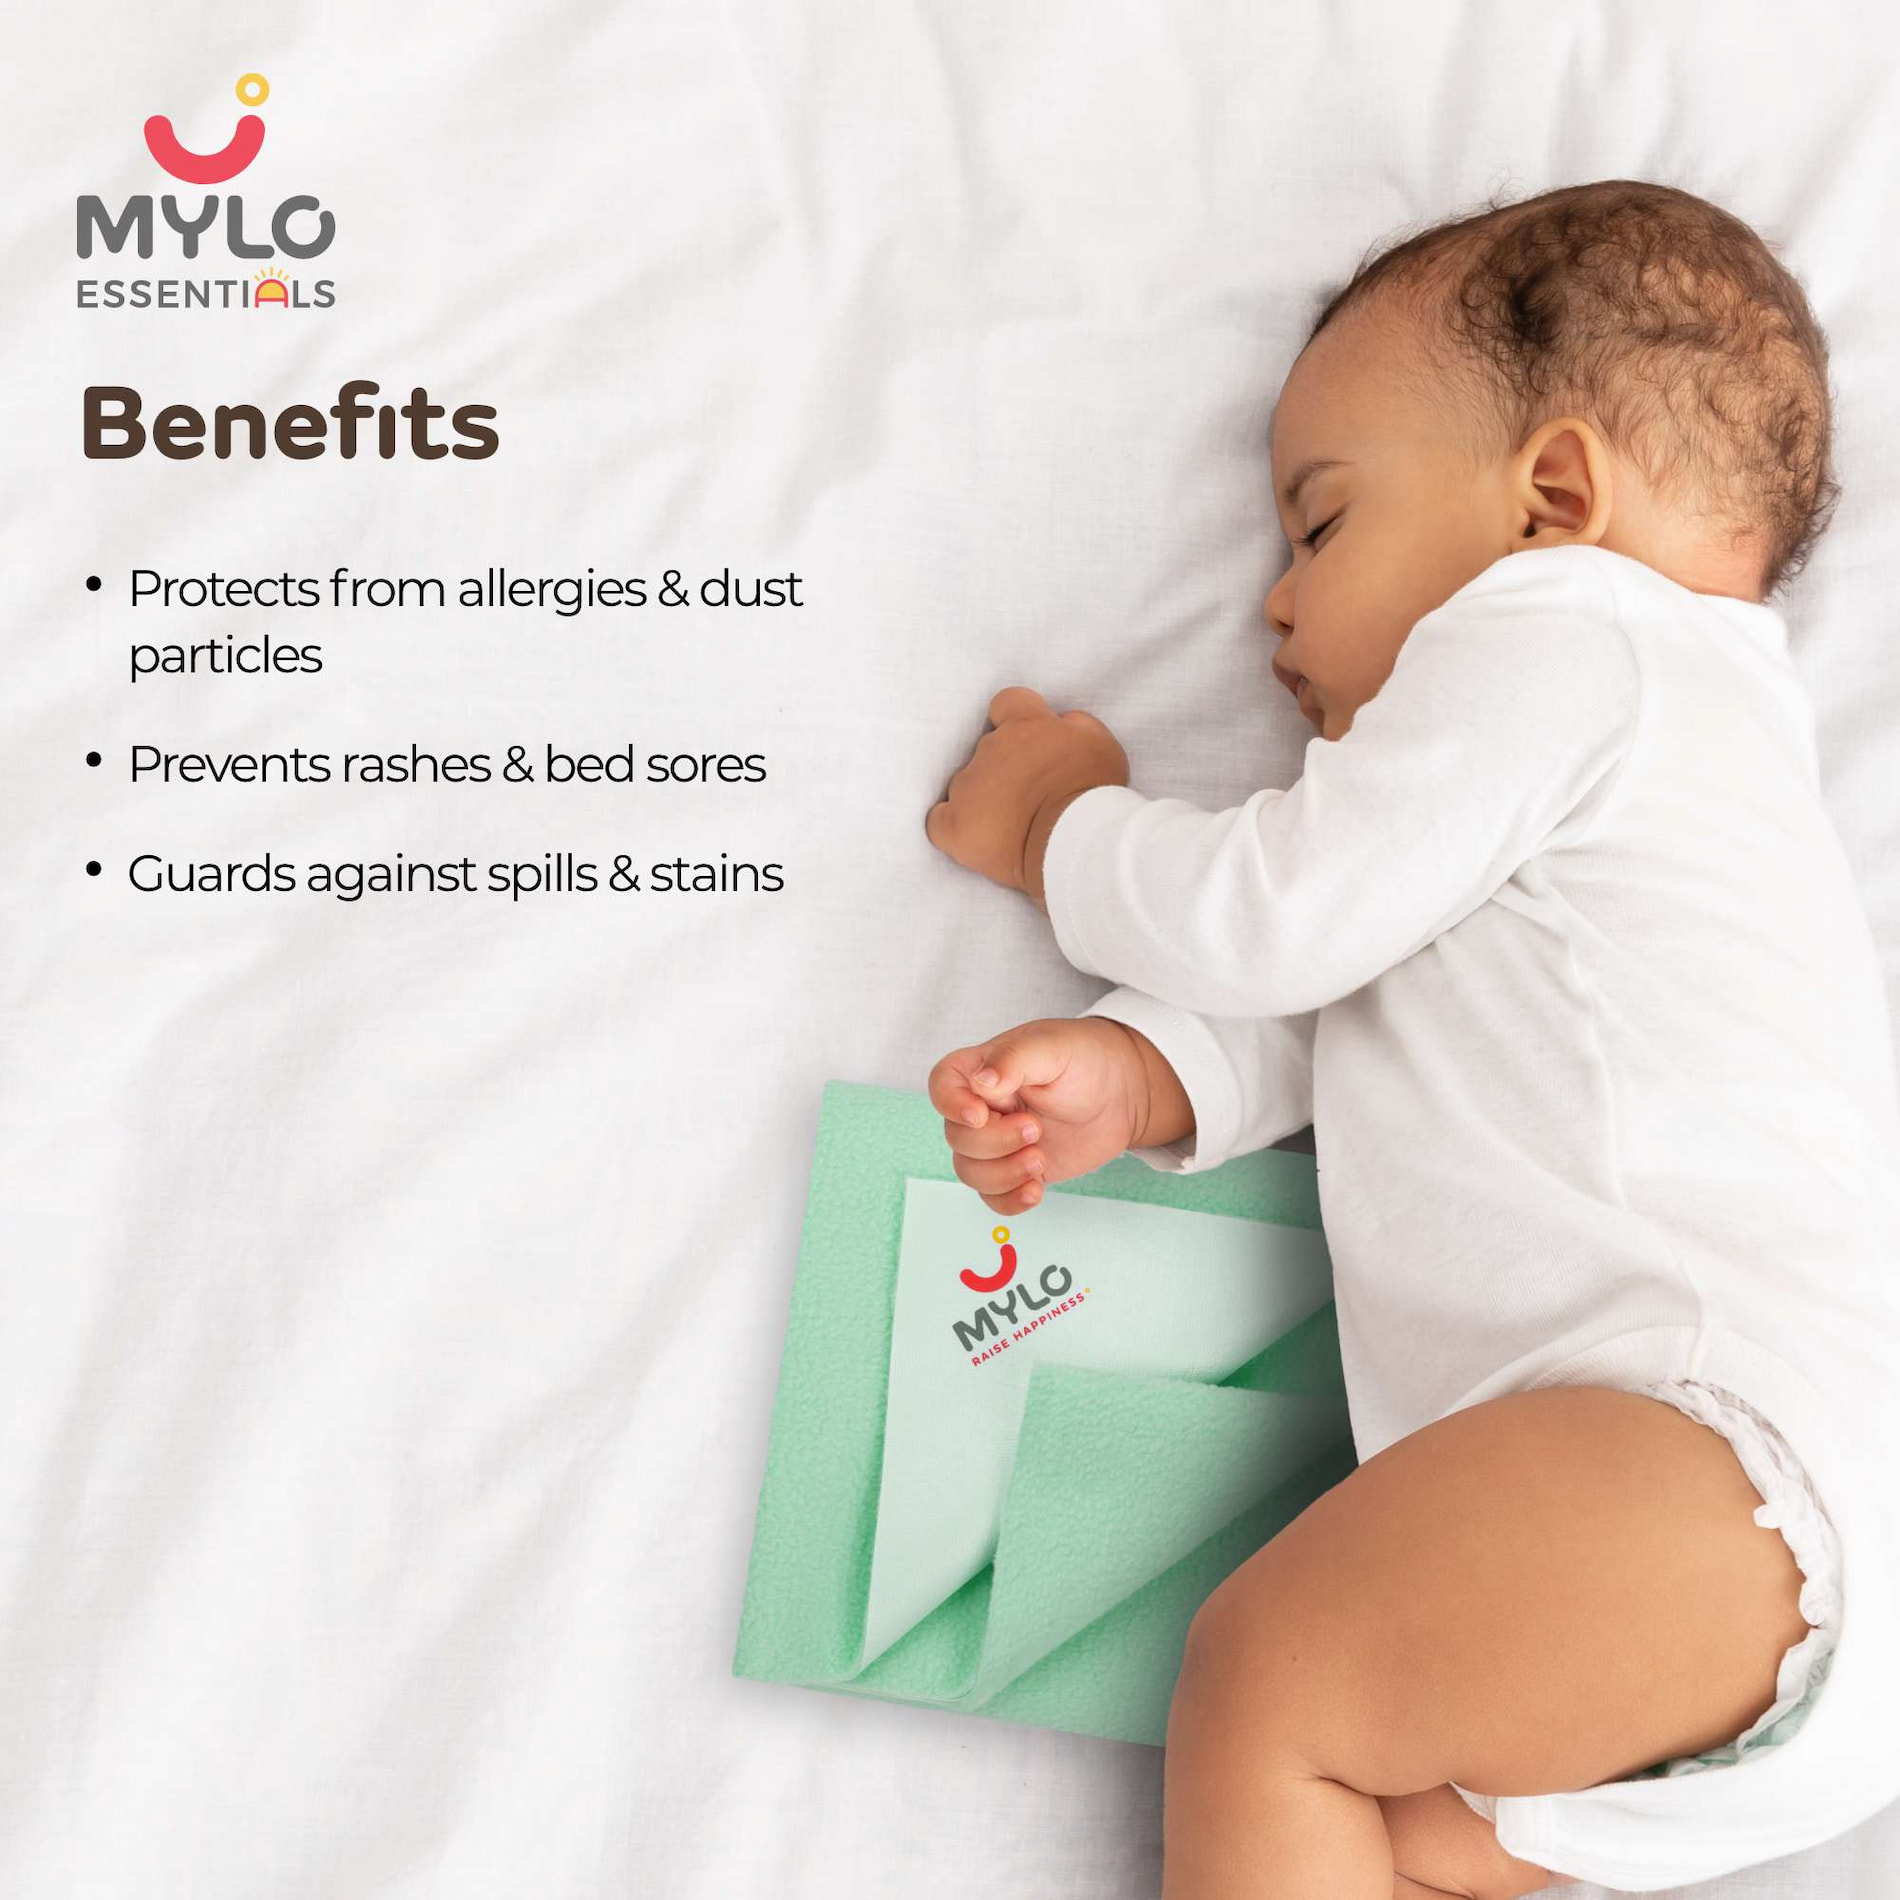 Mylo Waterproof Extra Absorbent Dry Sheet & Bed Protector - Sea Green (L)